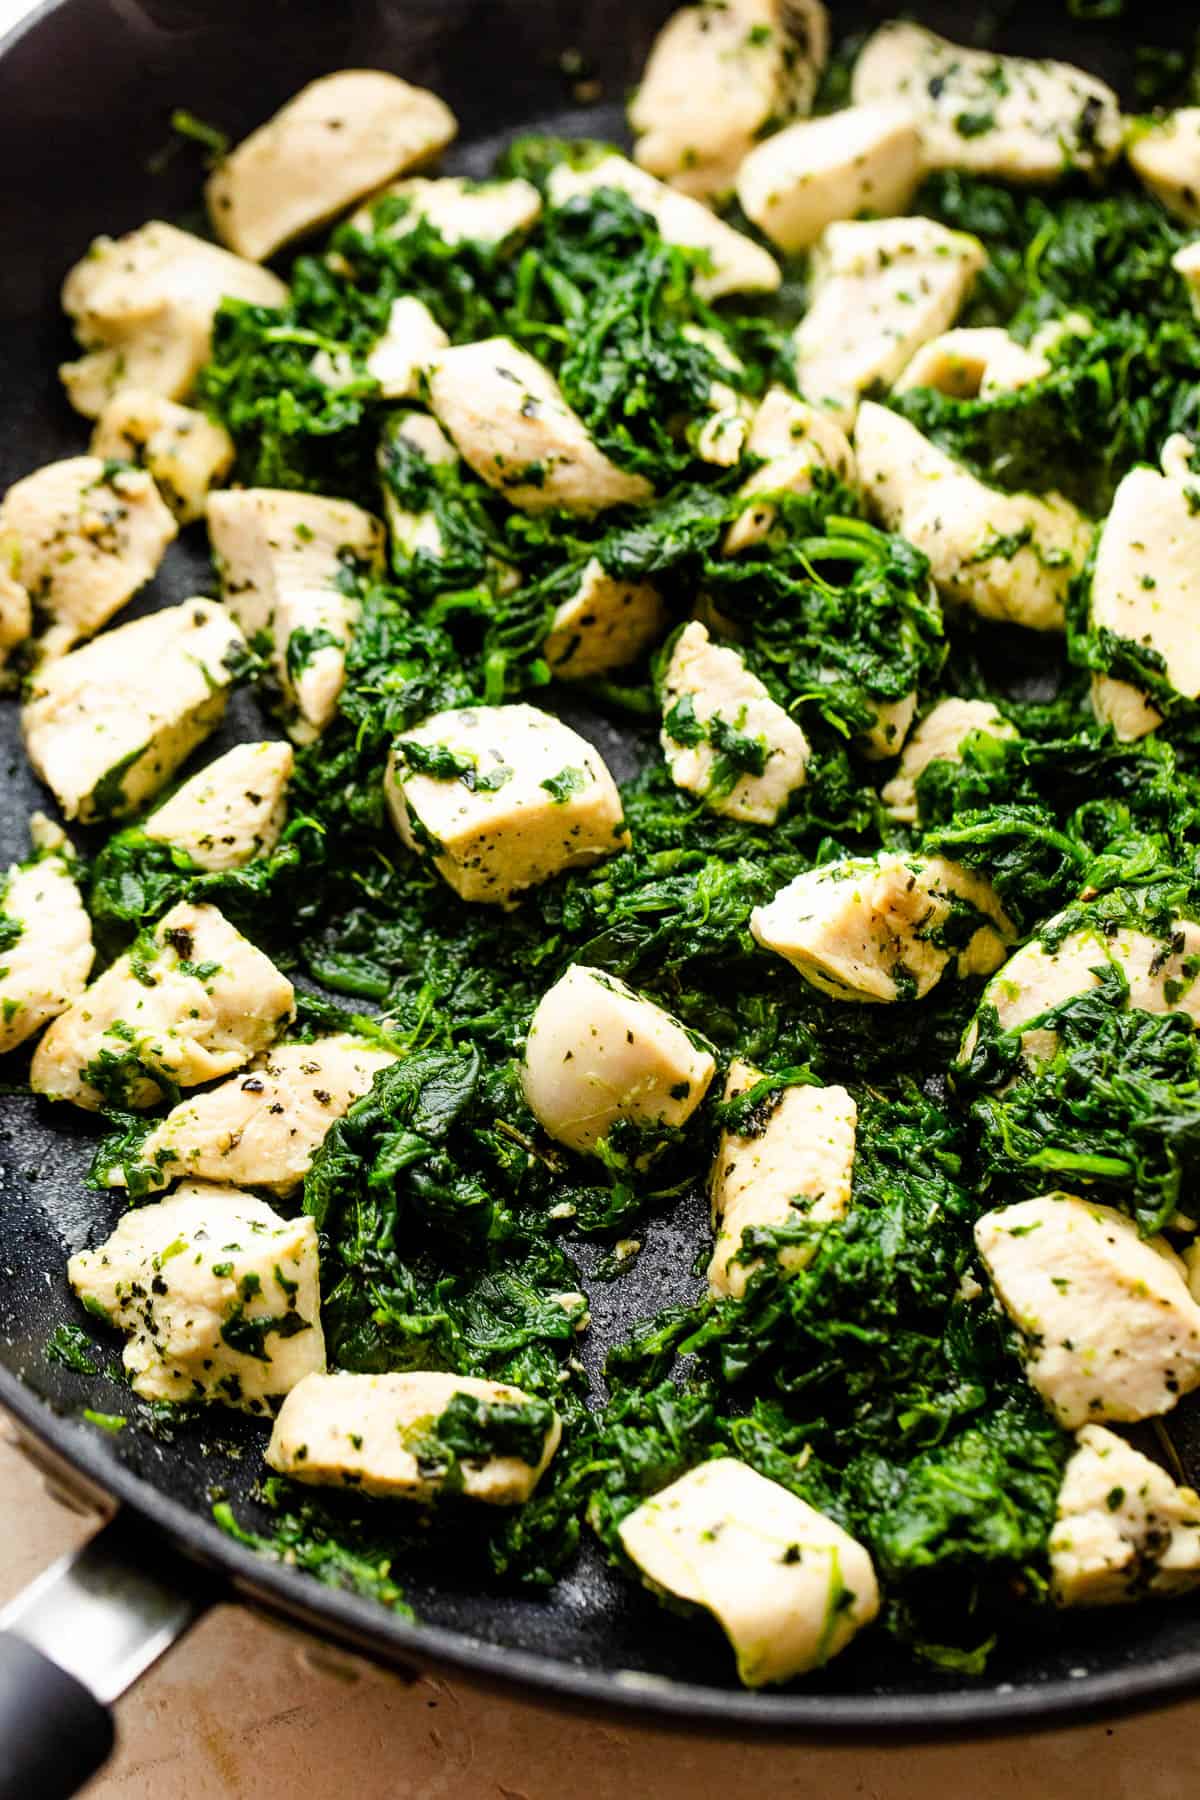 cooking chicken breast pieces and spinach in a black skillet